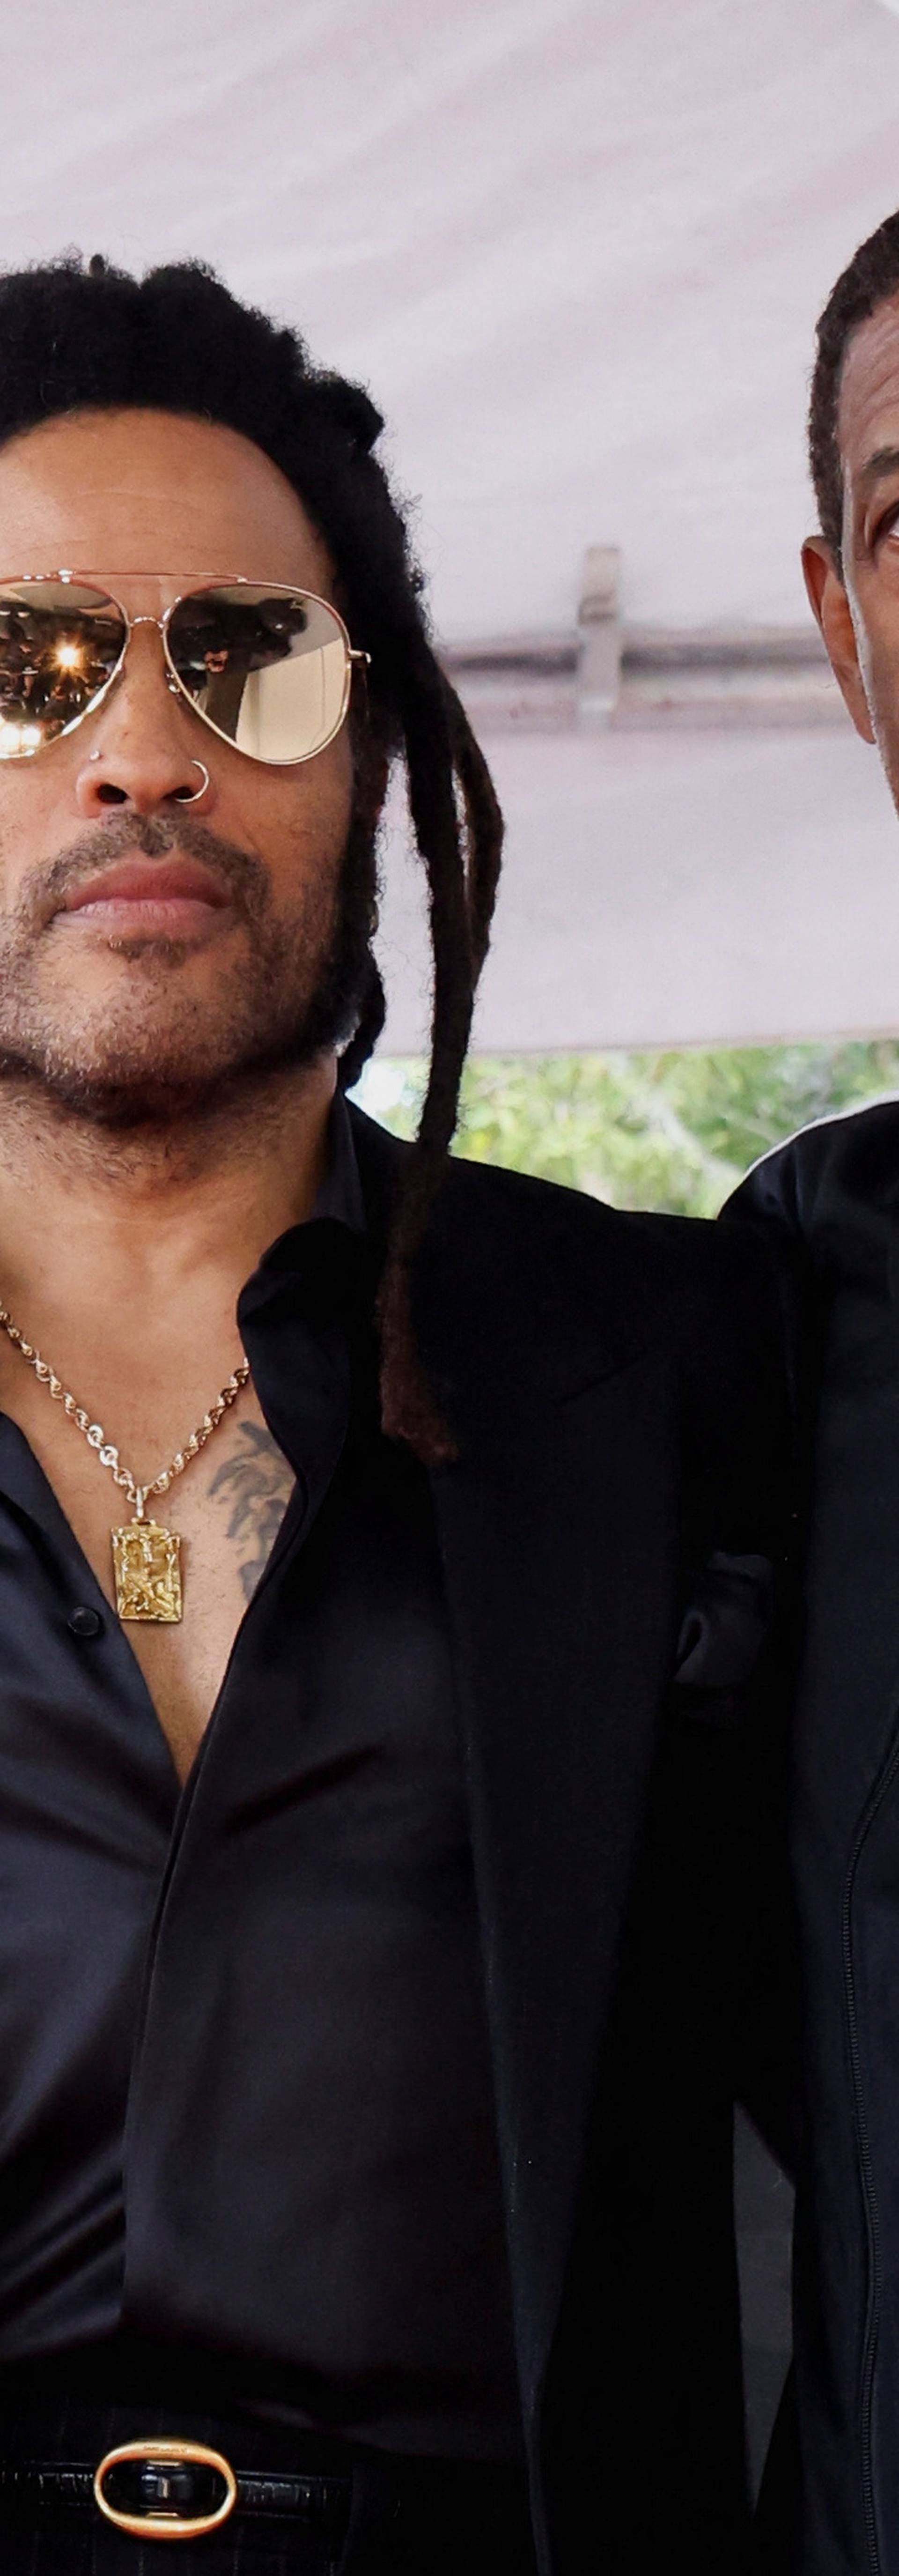 Singer-songwriter Lenny Kravitz unveils his star on the Hollywood Walk of Fame in Los Angeles